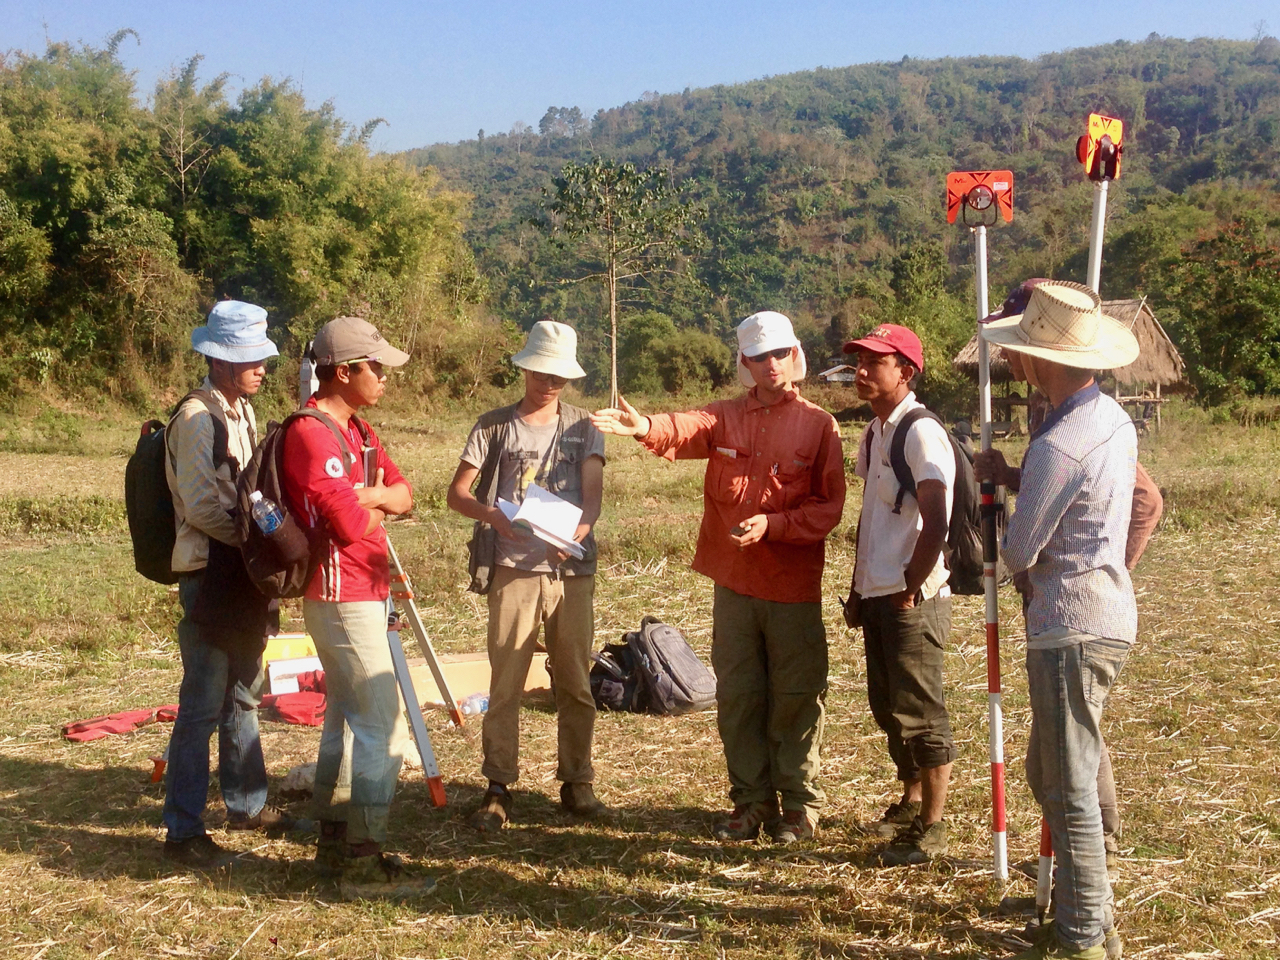 Dr Aron Meltzner instructs students on how to use the total station instrument for surveying (Source: Tim Dawson)